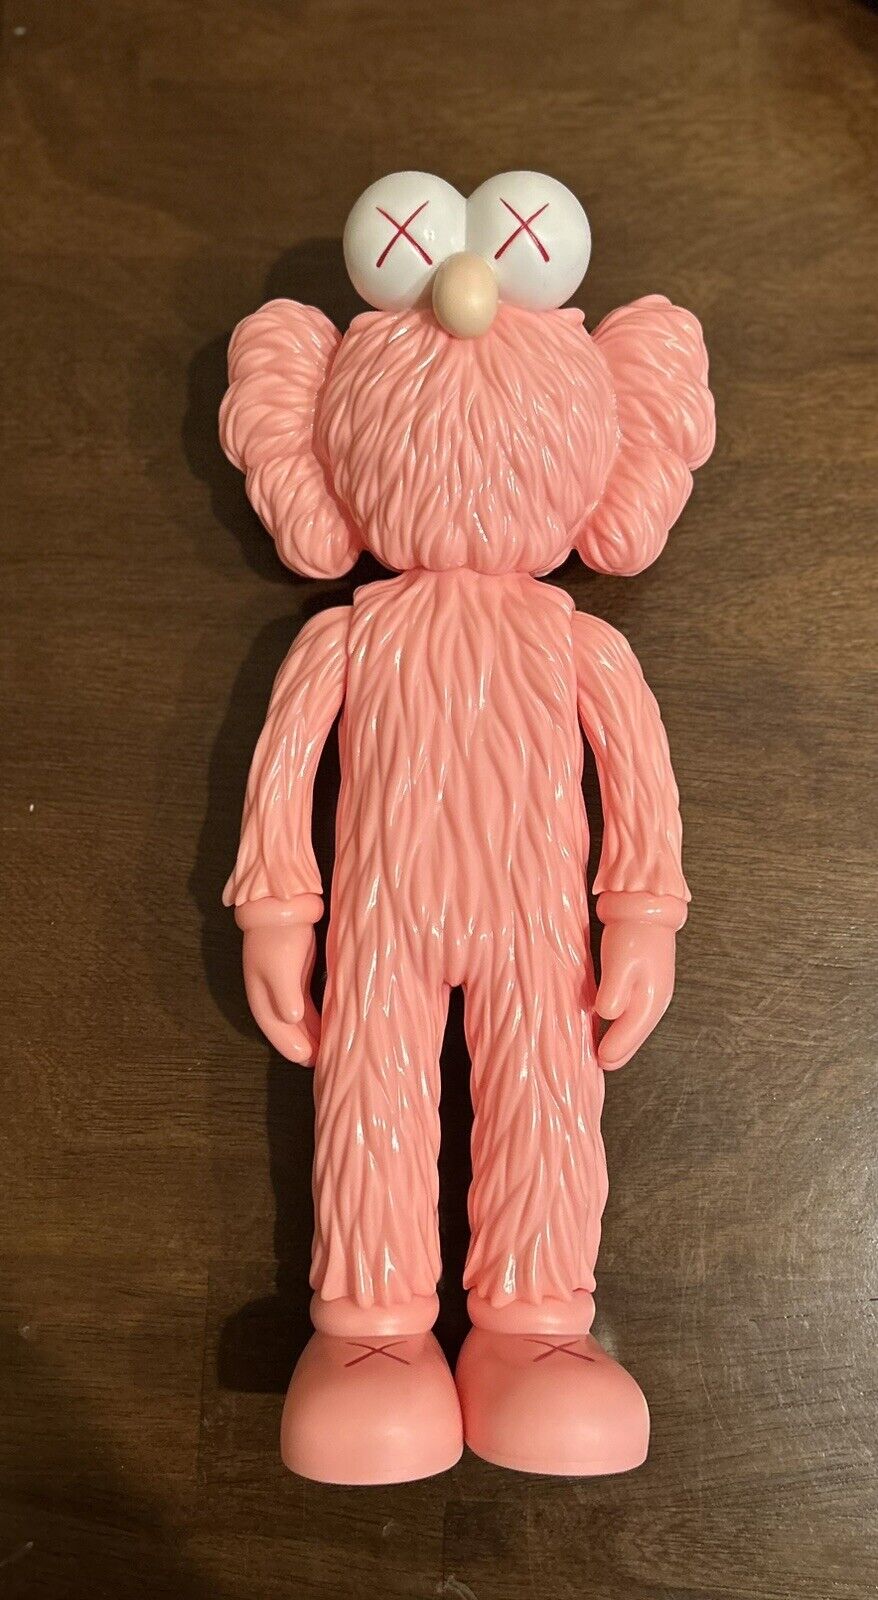 KAWS BFF Open Edition Vinyl Figure Pink (KAWS-015-PINK) One Size